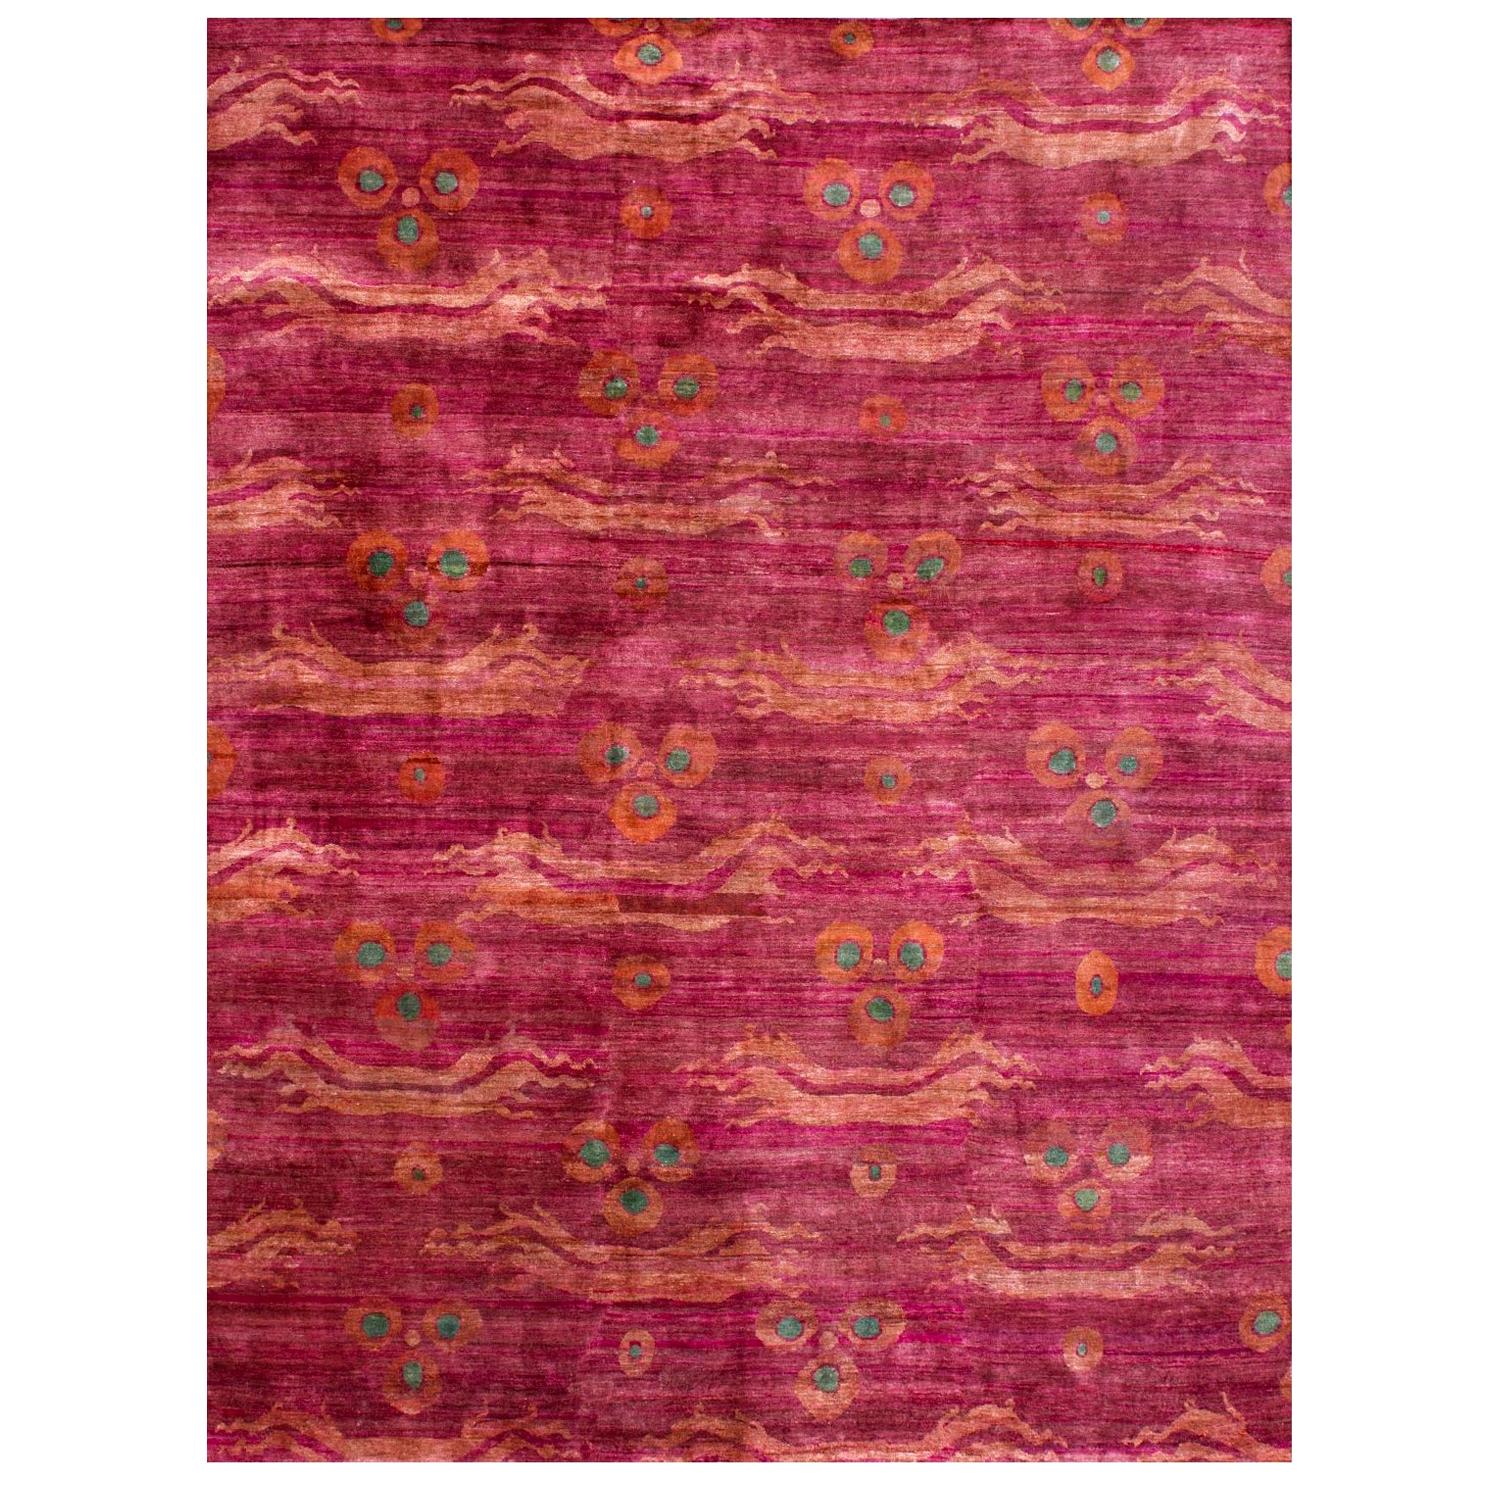 Contemporary Transitional Pink Fuchsia Teal Hand-Knotted Natural Silk Ikat Rug